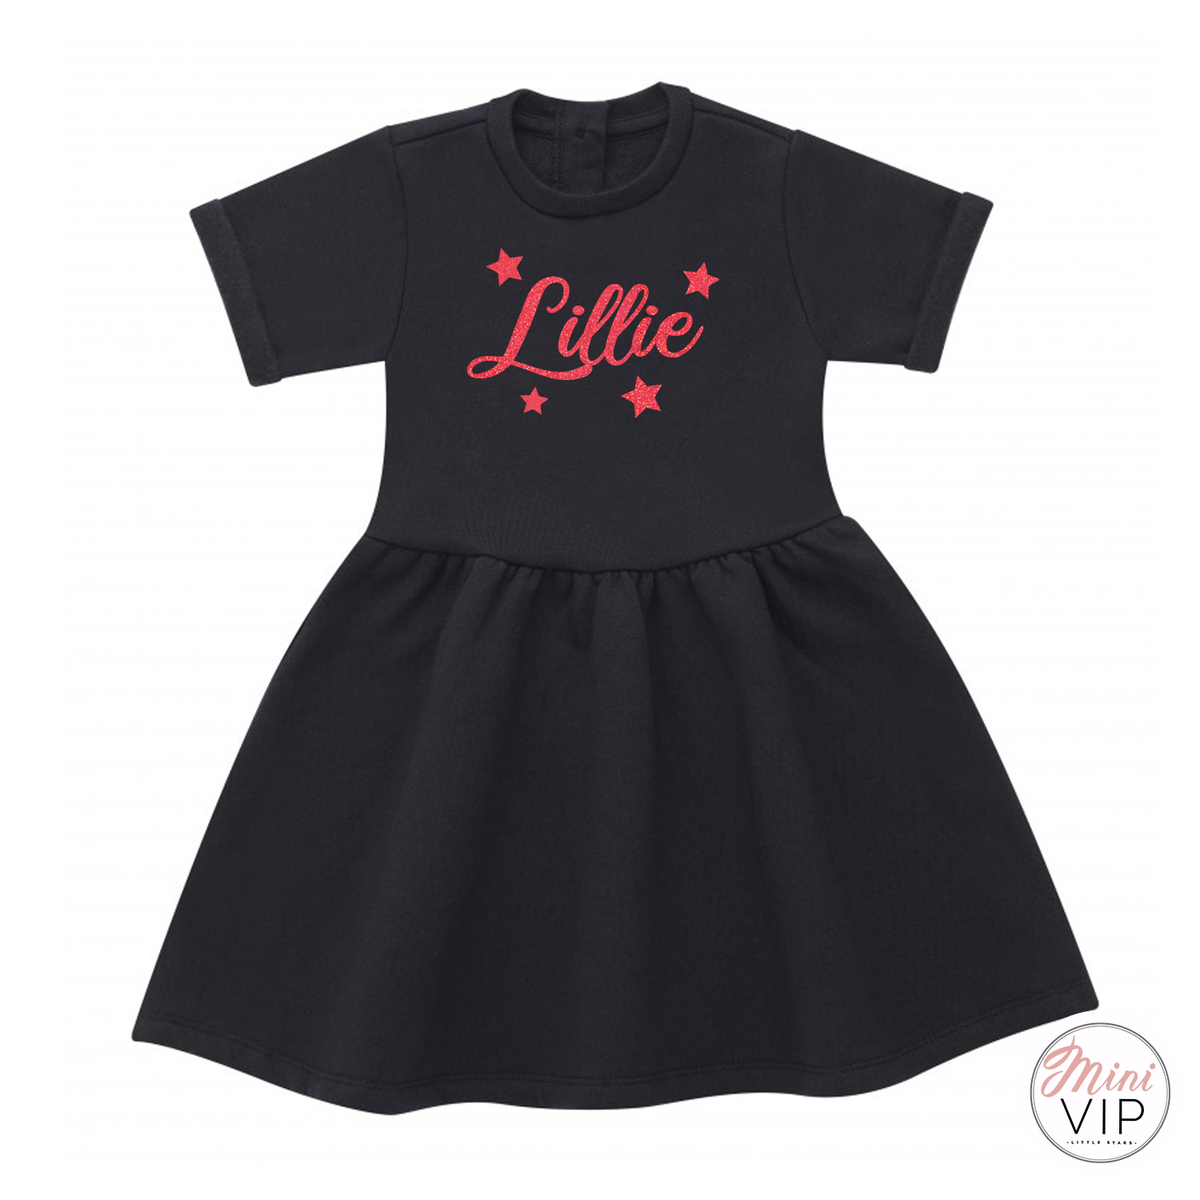 Personalised Black Dress with Red Festive Glitter Print